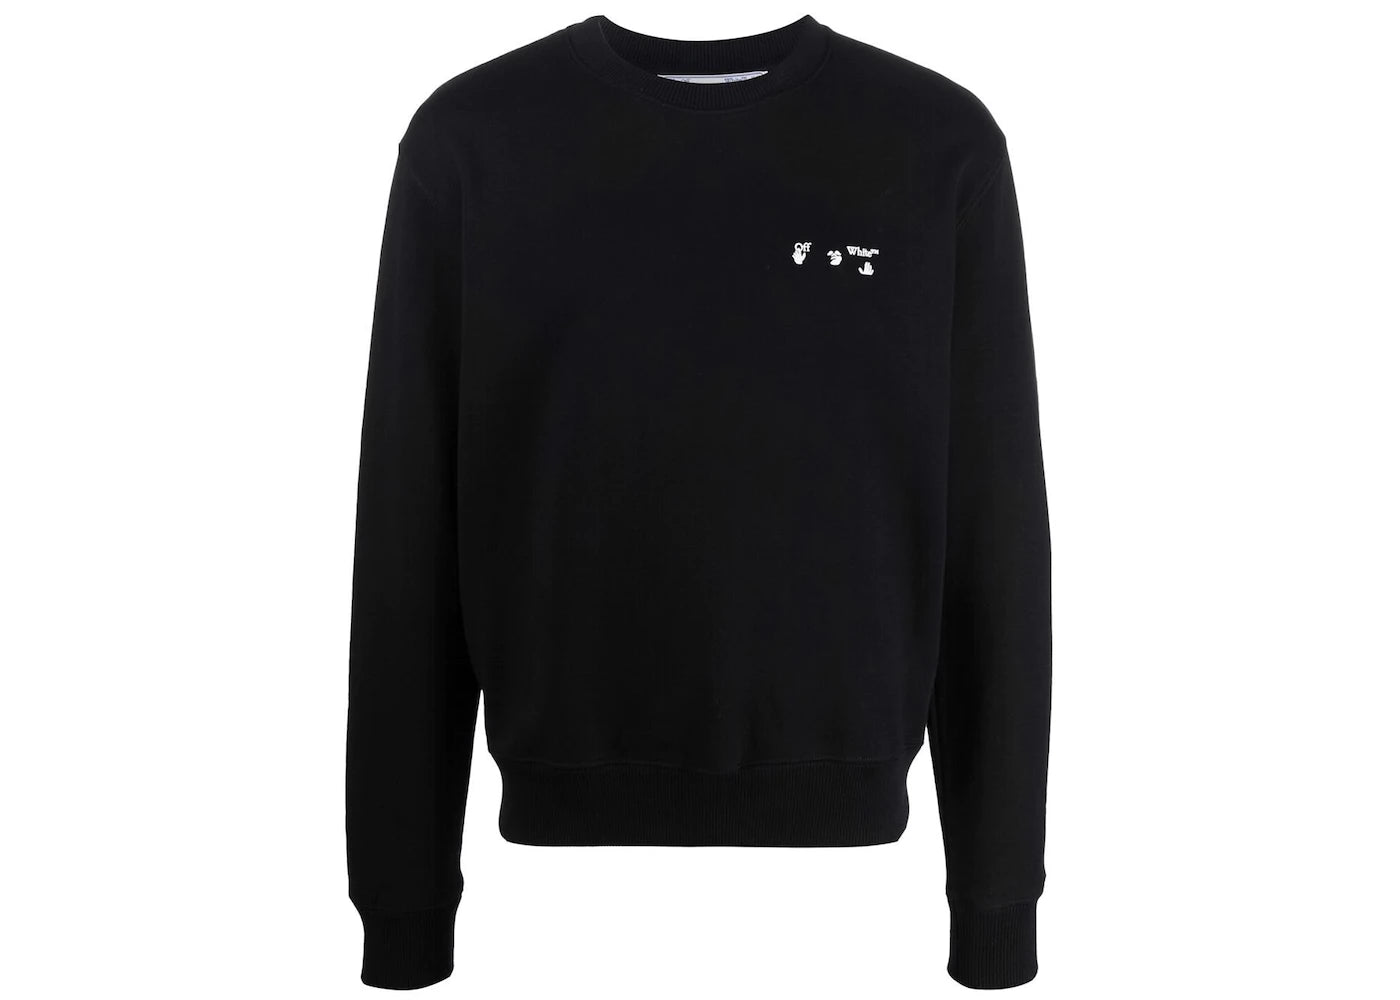 OFFWHITE BLACK SWEATER